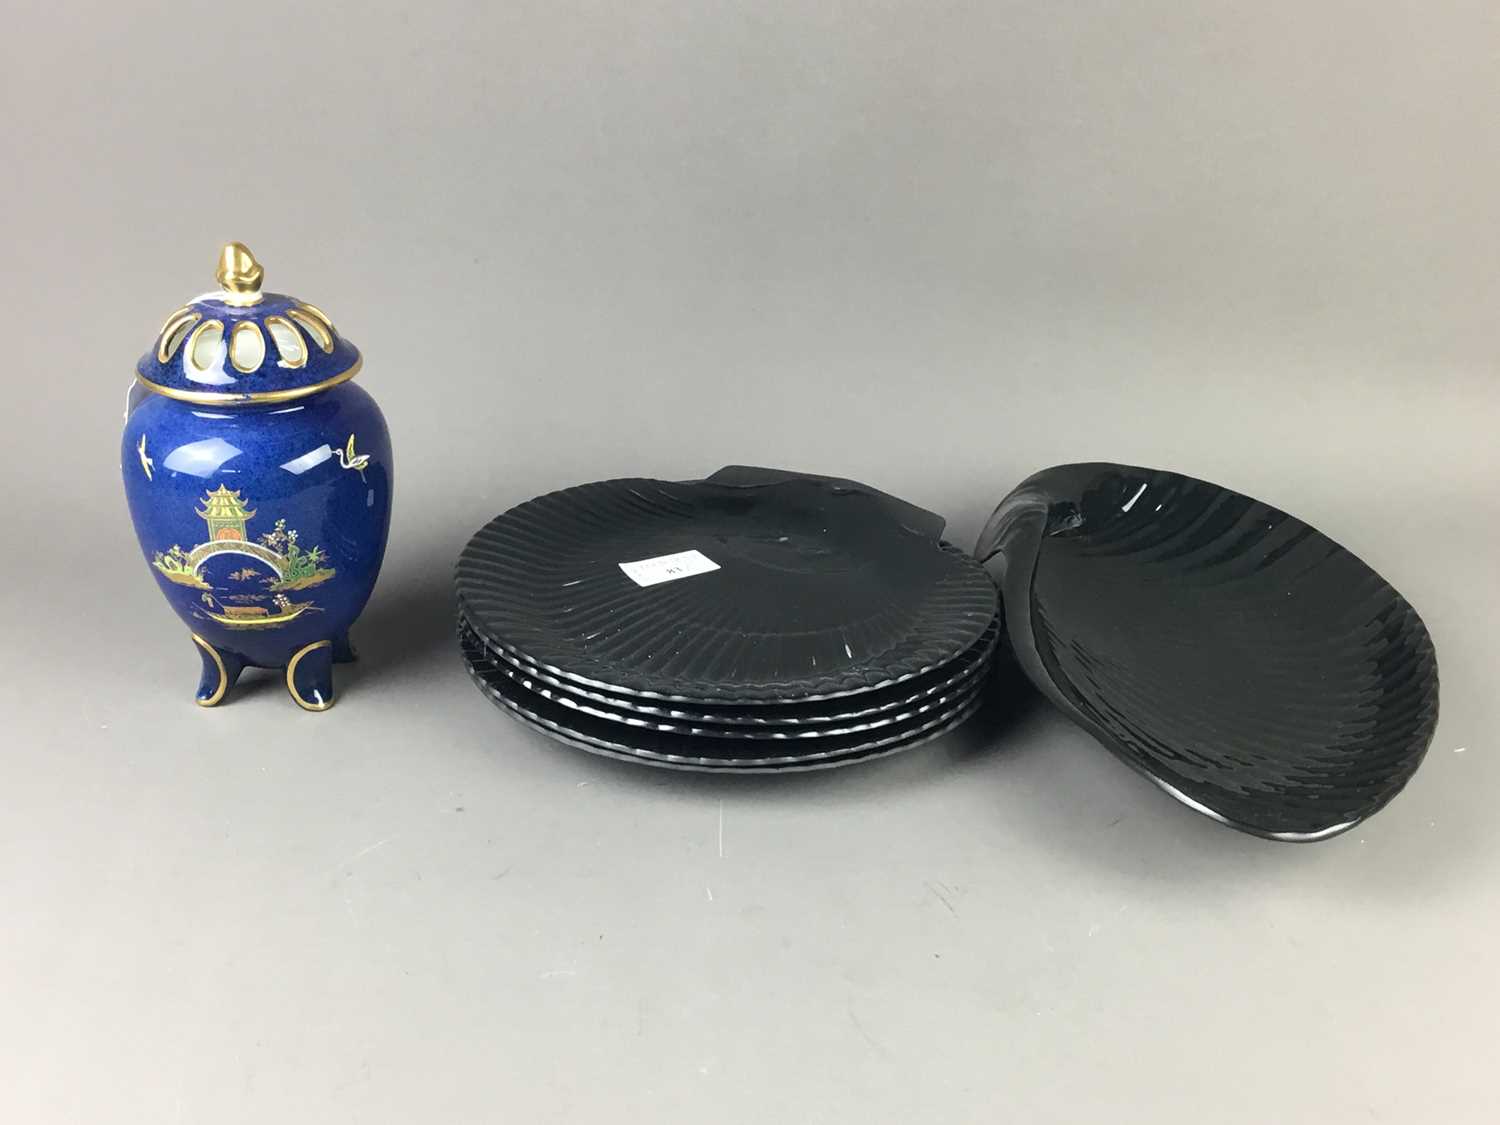 Lot 83 - A CARLTON WARE BLUE ROYALE CERAMIC POT POURRI ALONG WITH WEDGWOOD BLACK BASALT SHELL MOULDED DISHES